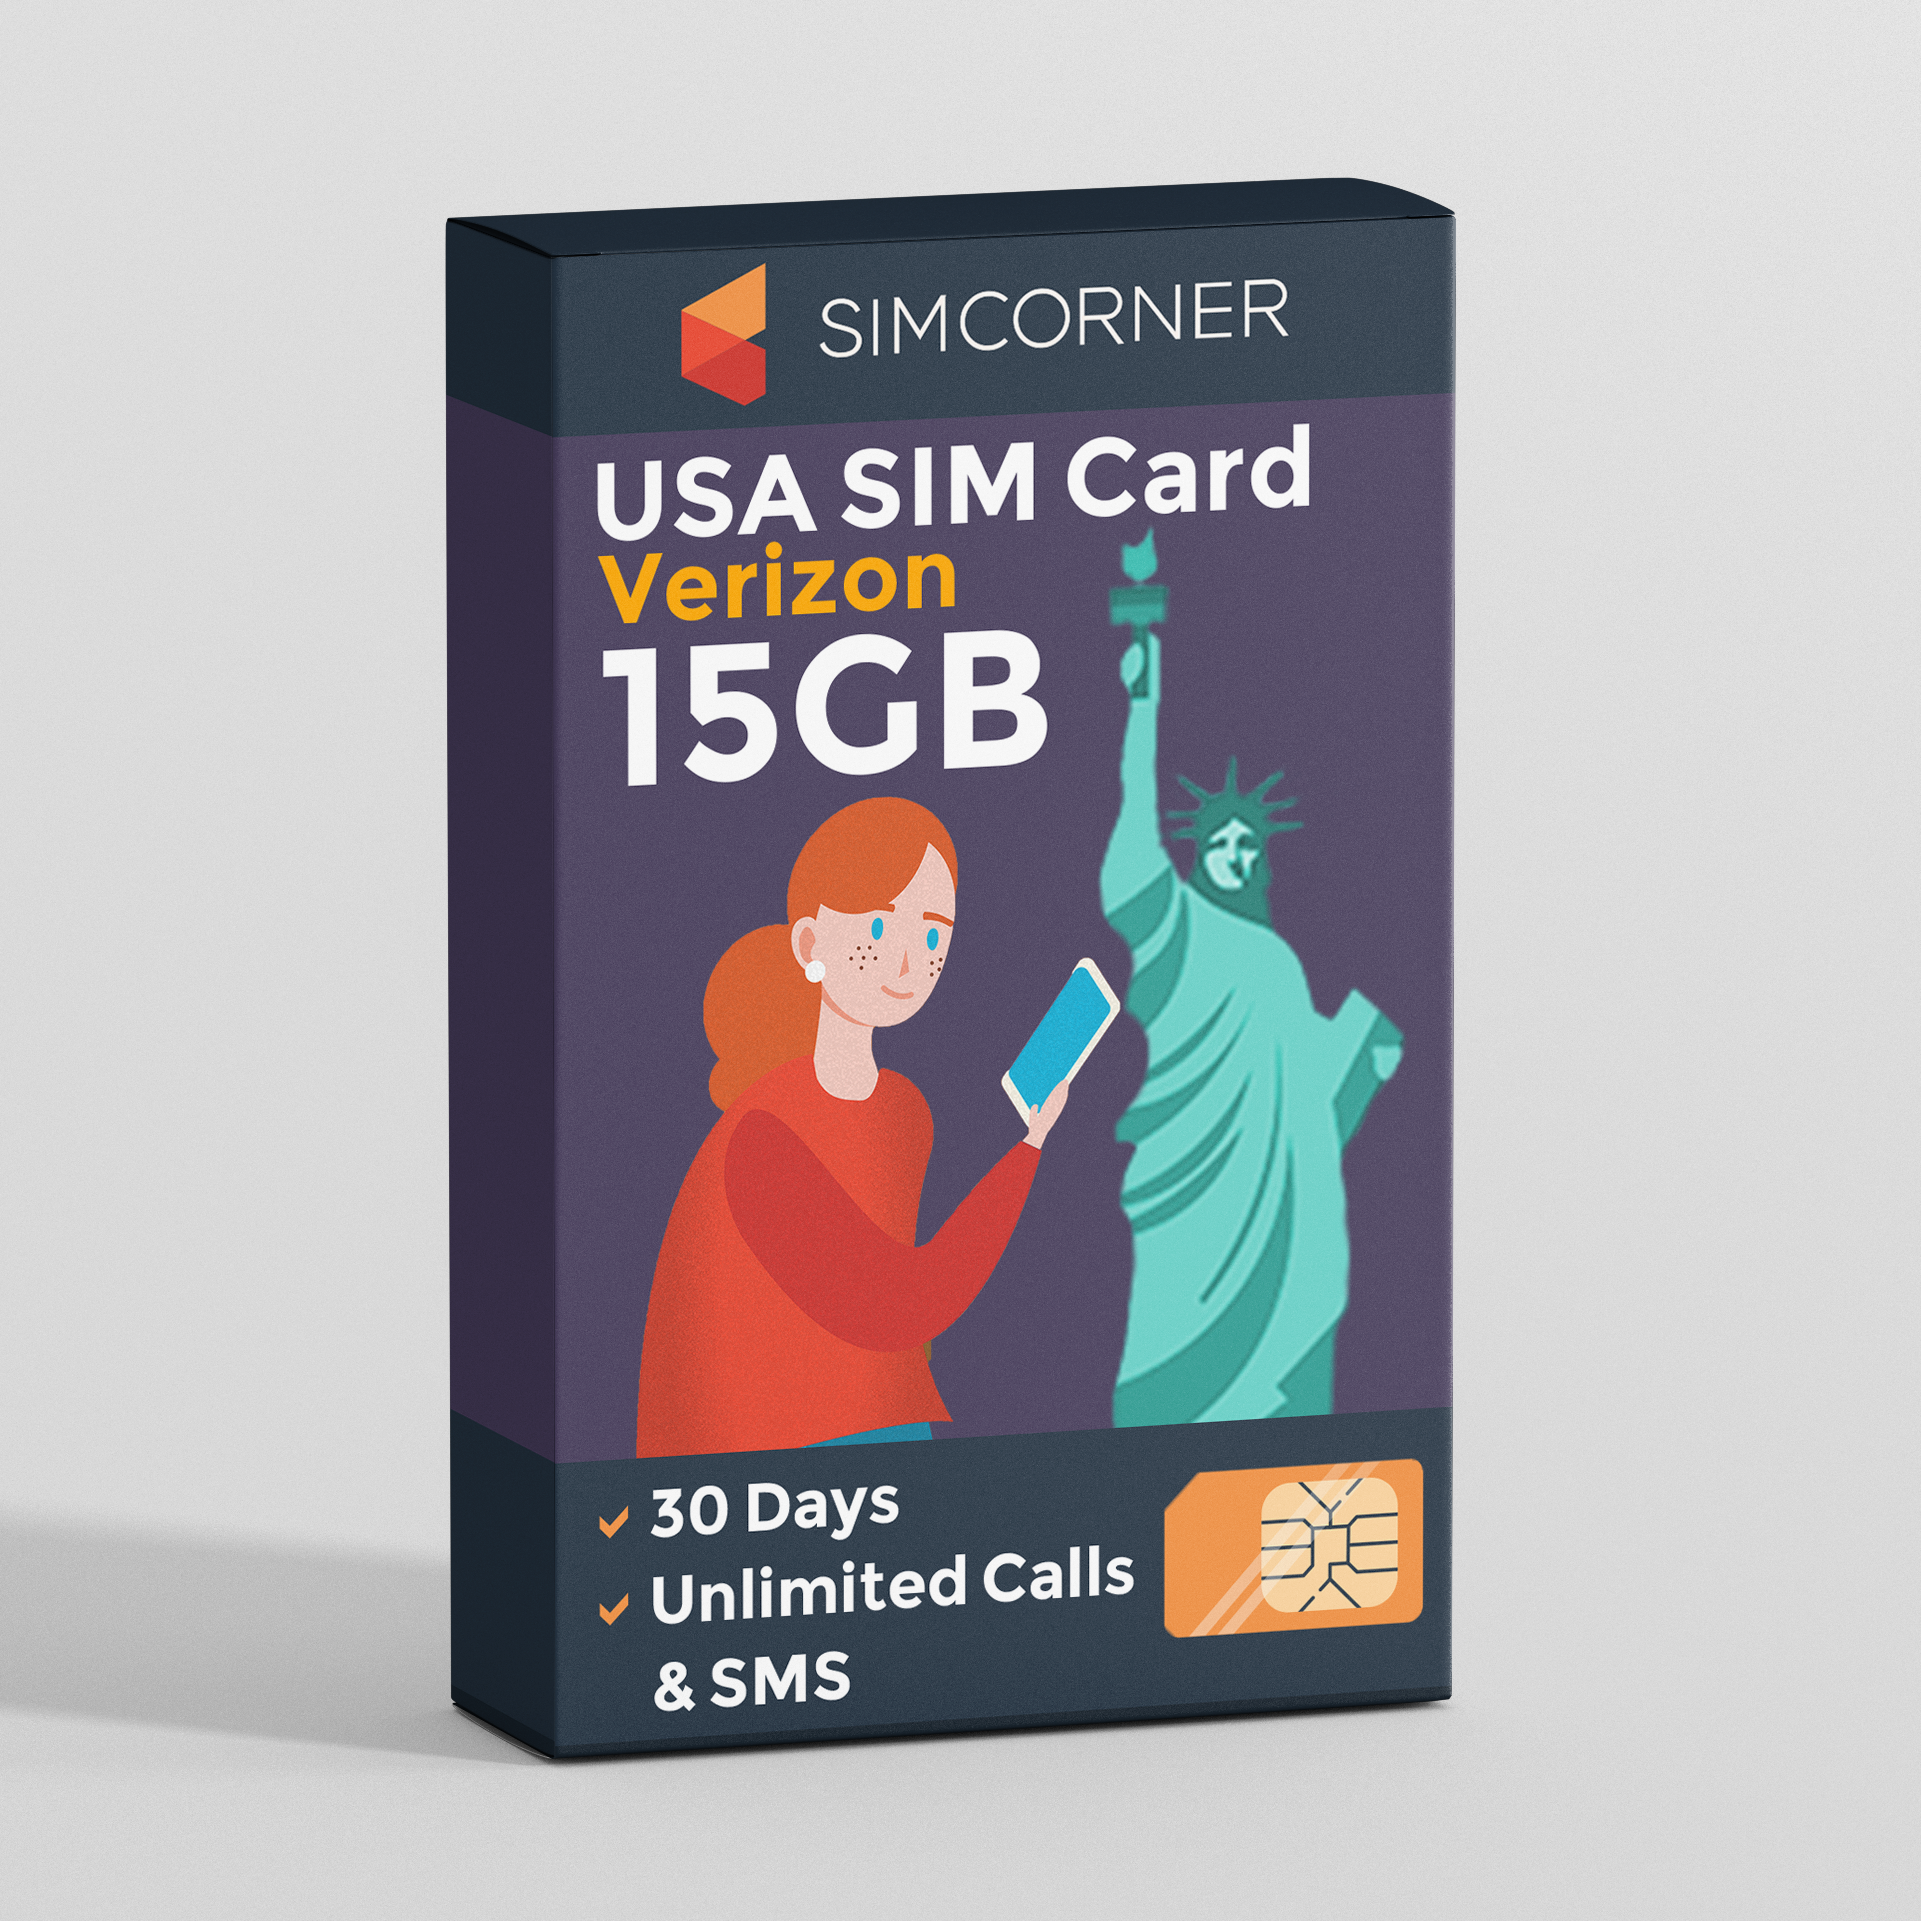 Best Prepaid USA sim Card for travelers and tourists visiting US